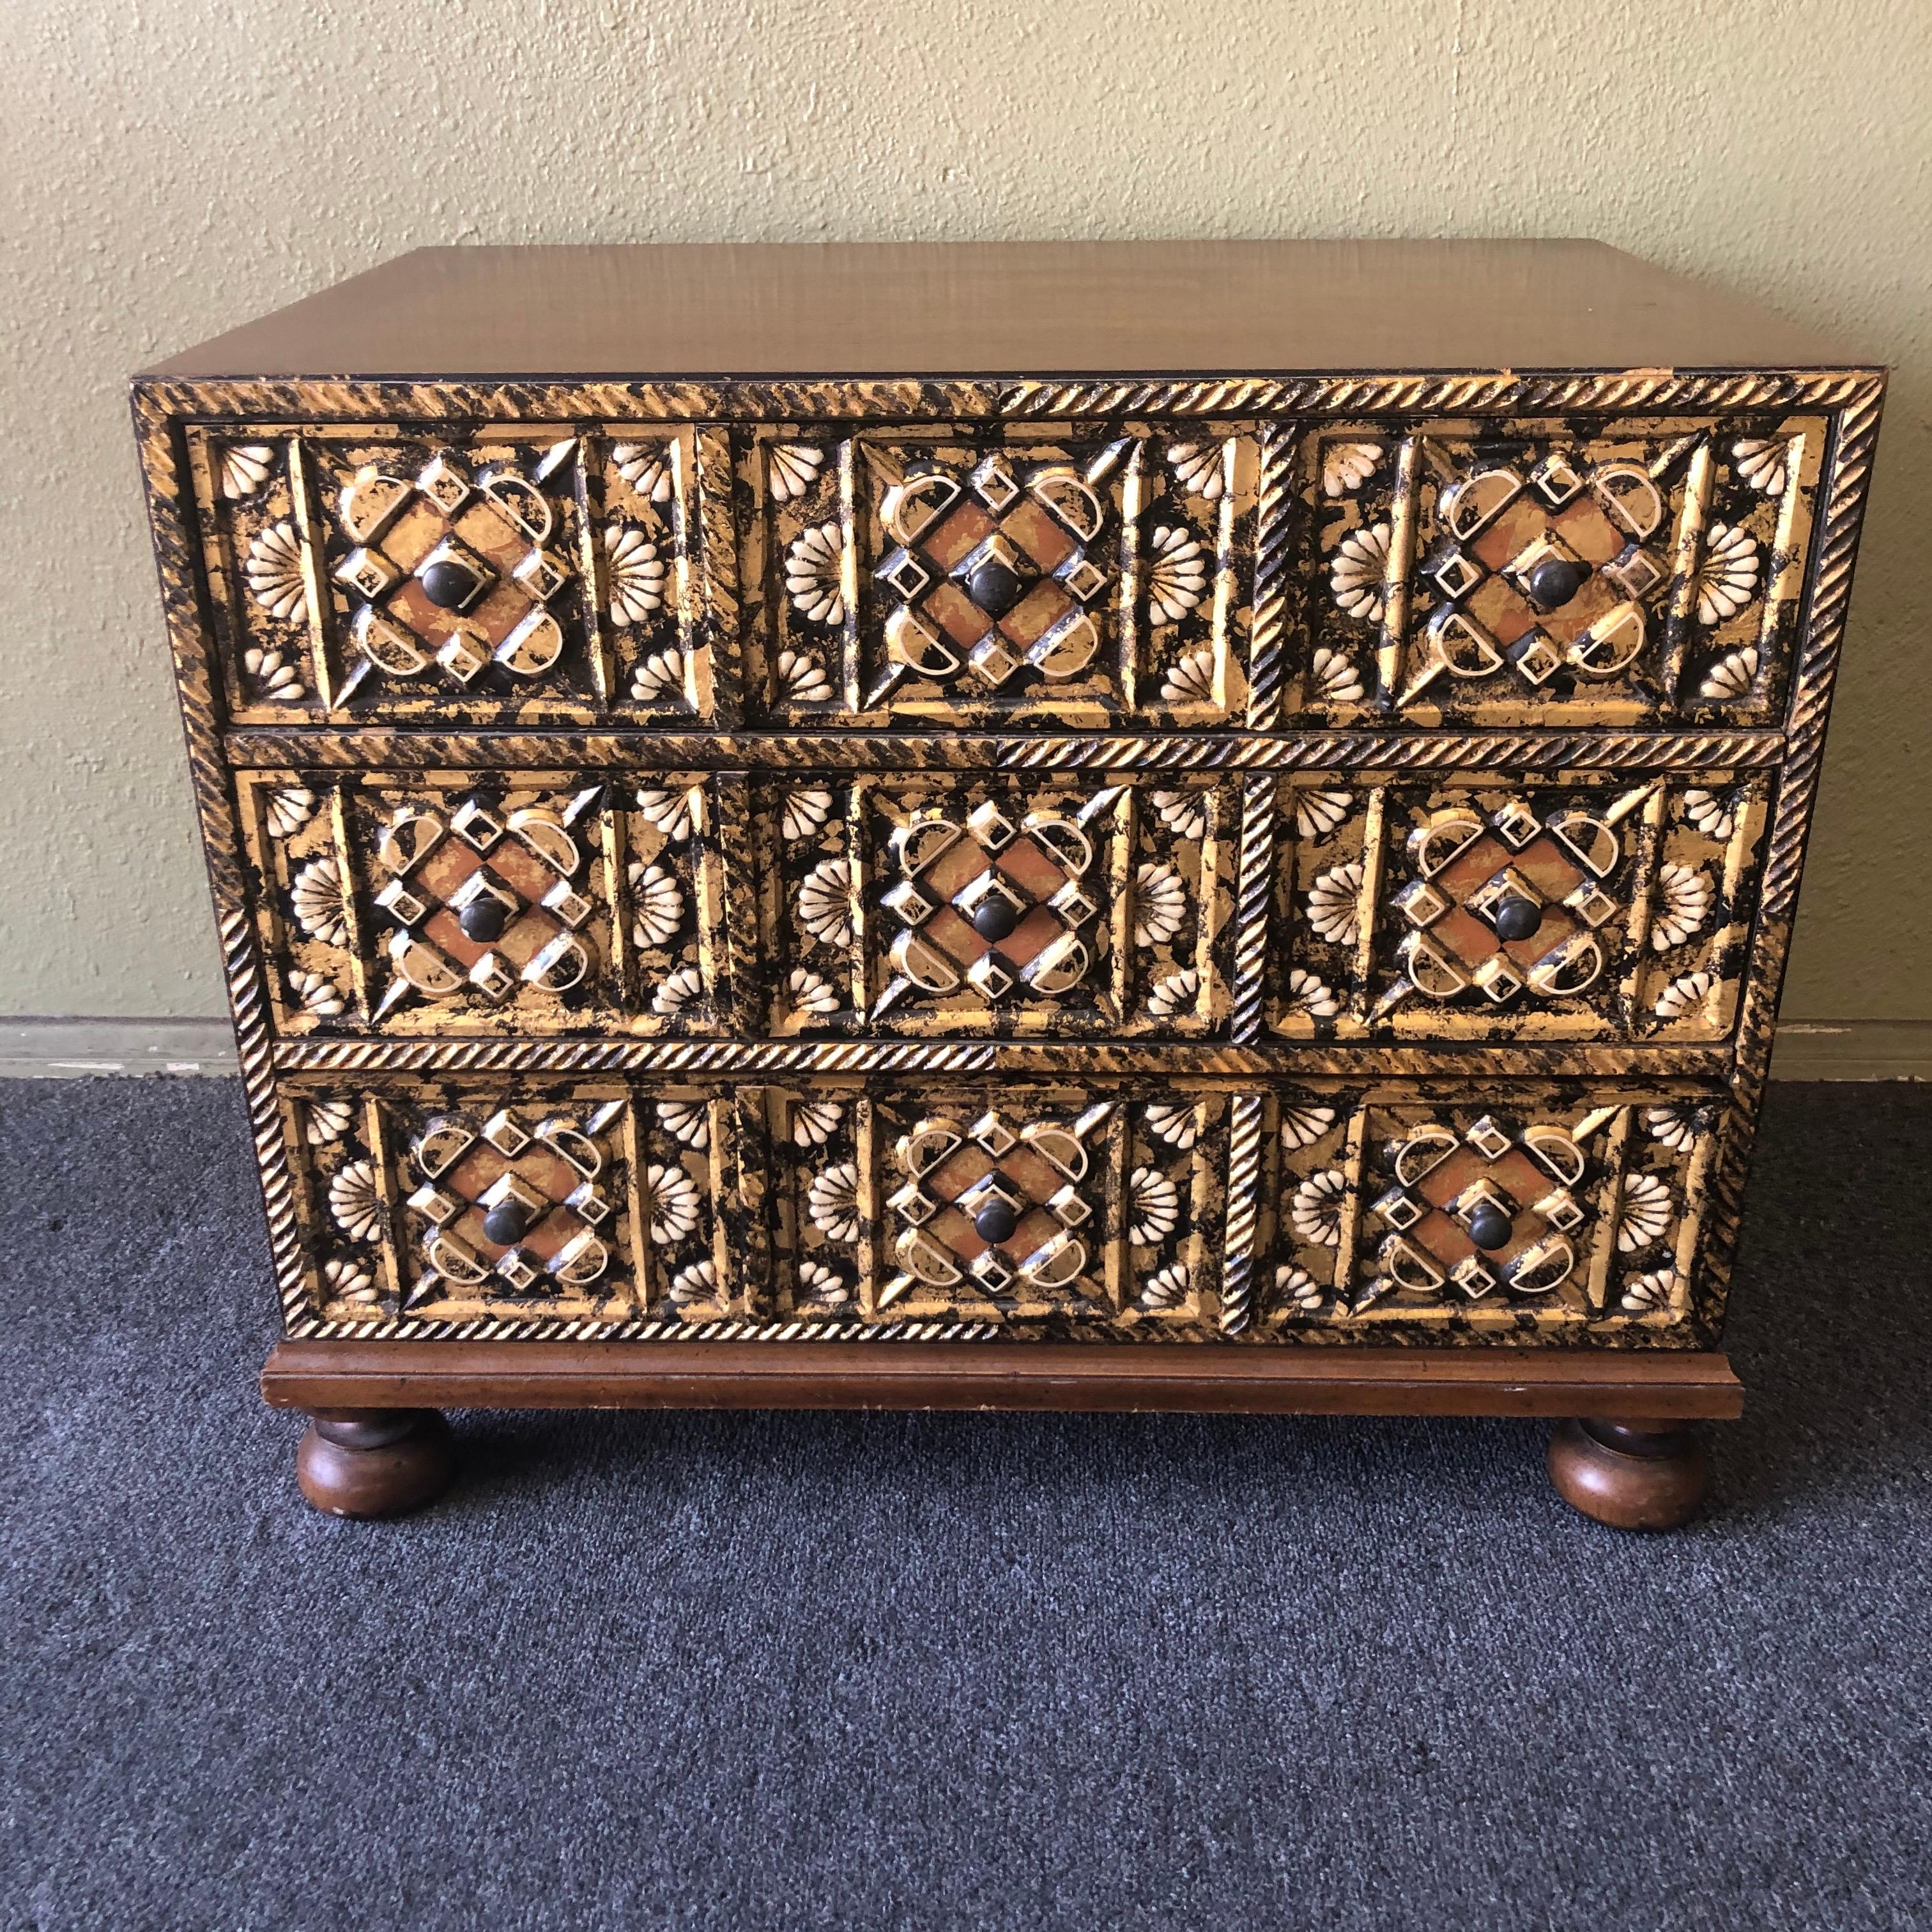 Spanish Baroque style three drawer chest by John Widdicomb, circa 1980s. This small dresser, with its romantic and ornately painted floral facade has a simple frame that is beautifully detailed with ornately painted, gilt and carved front with fans